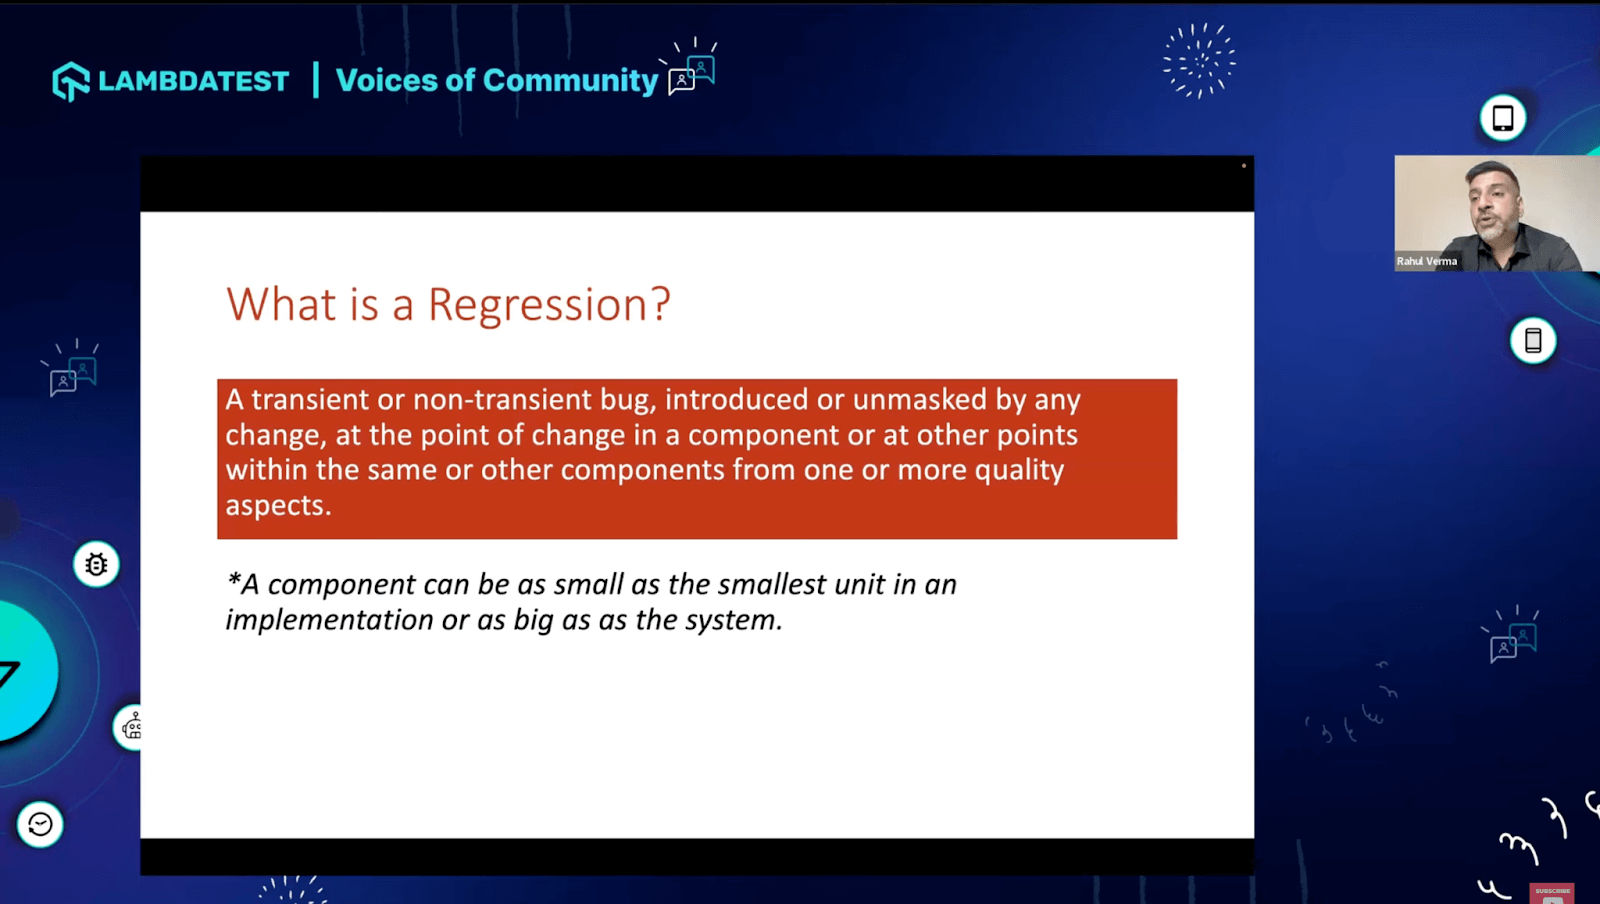 Back to Basics: What is a Regression?